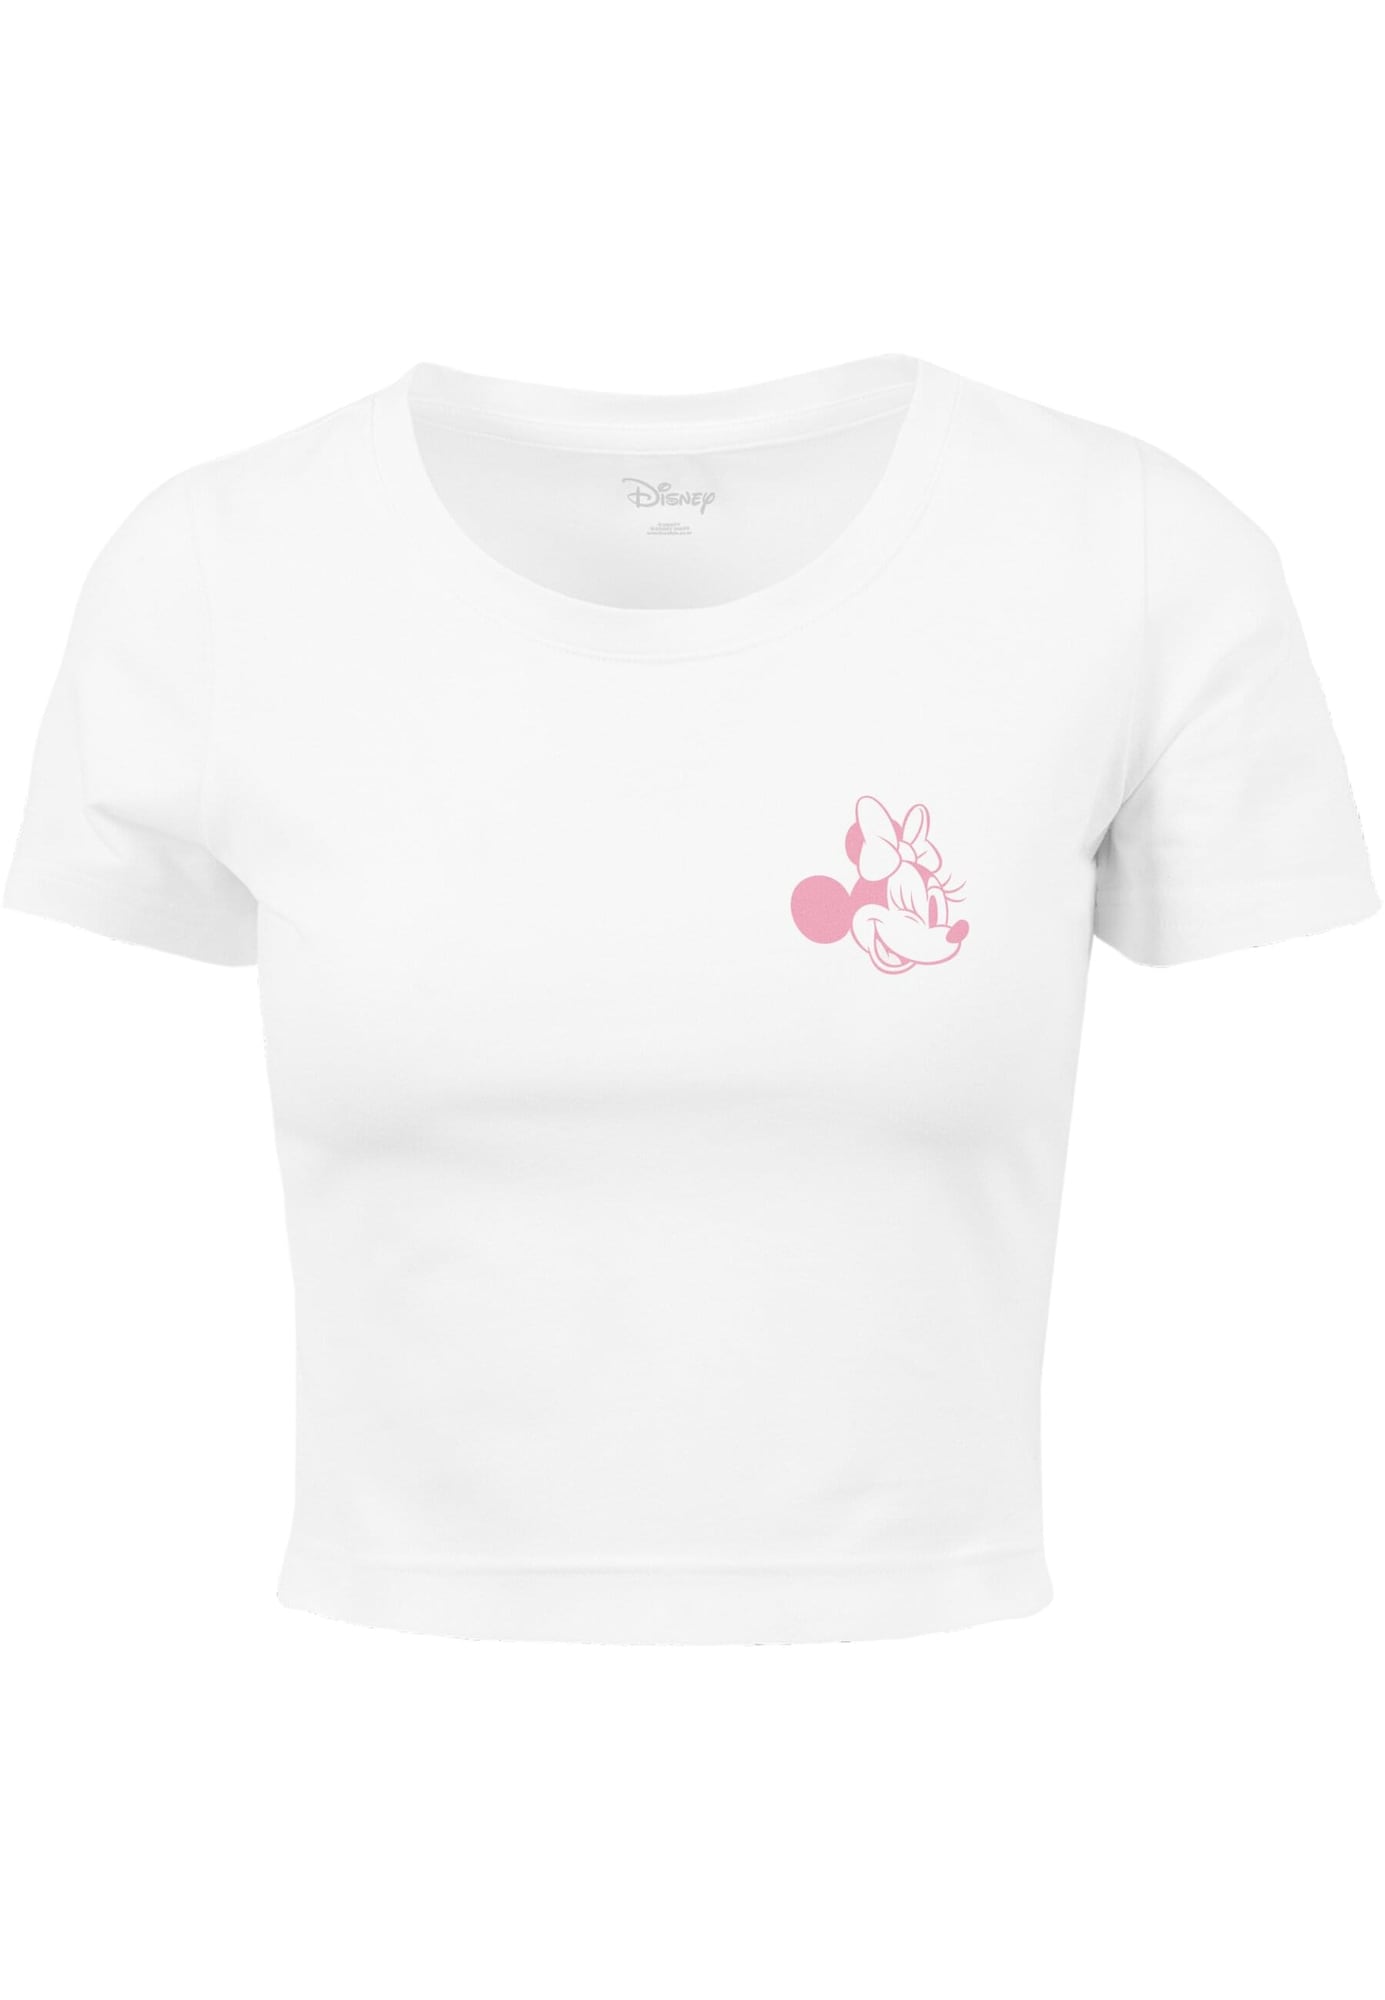 t-shirt 'minnie mouse wink'